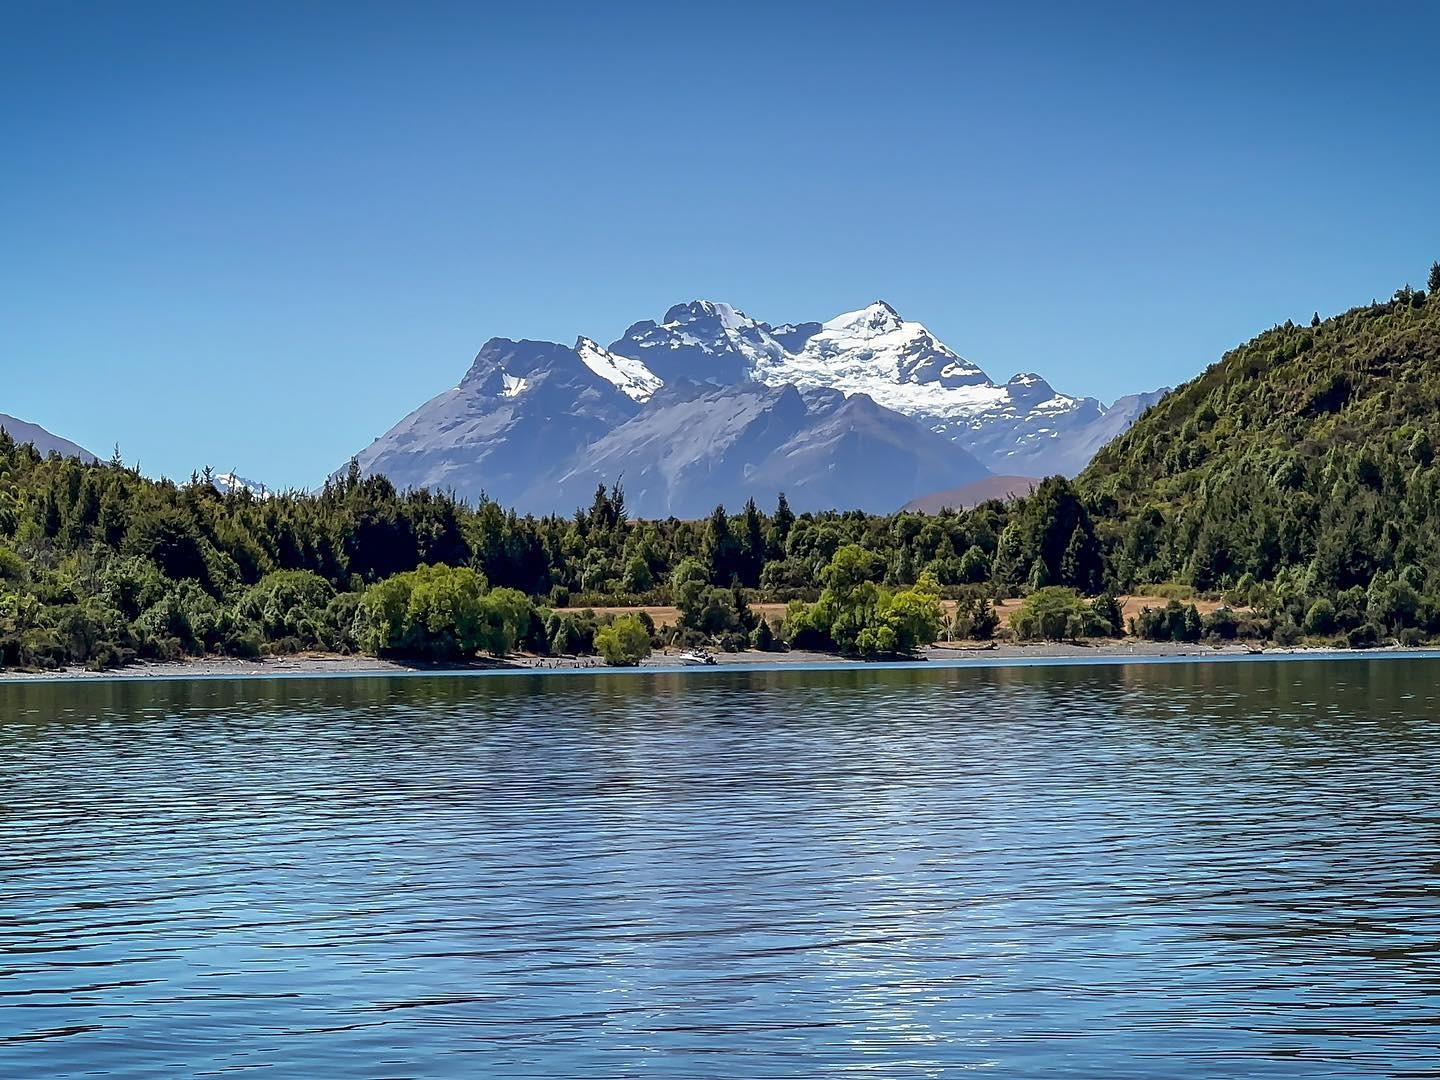 The ideal time to explore Pigeon Island and Lake Whakatipu is during the spring and summer months, from November to March